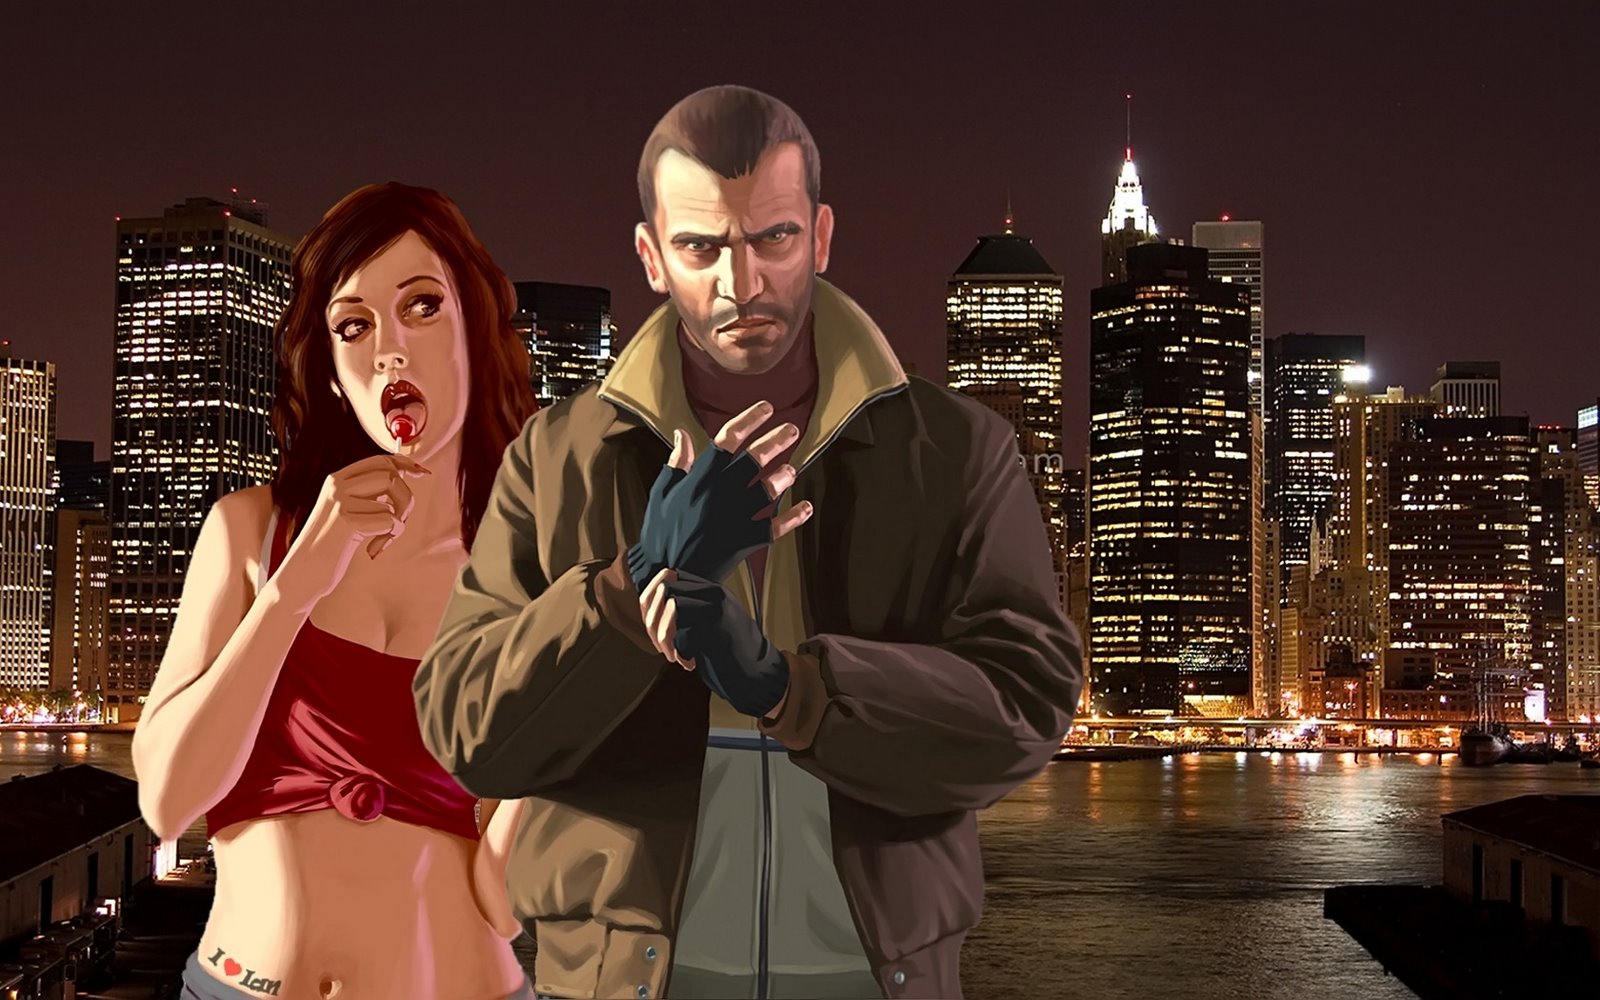 Free Download Wallpapers Box Grand Theft Auto Iv Gta4 Hd Images, Photos, Reviews